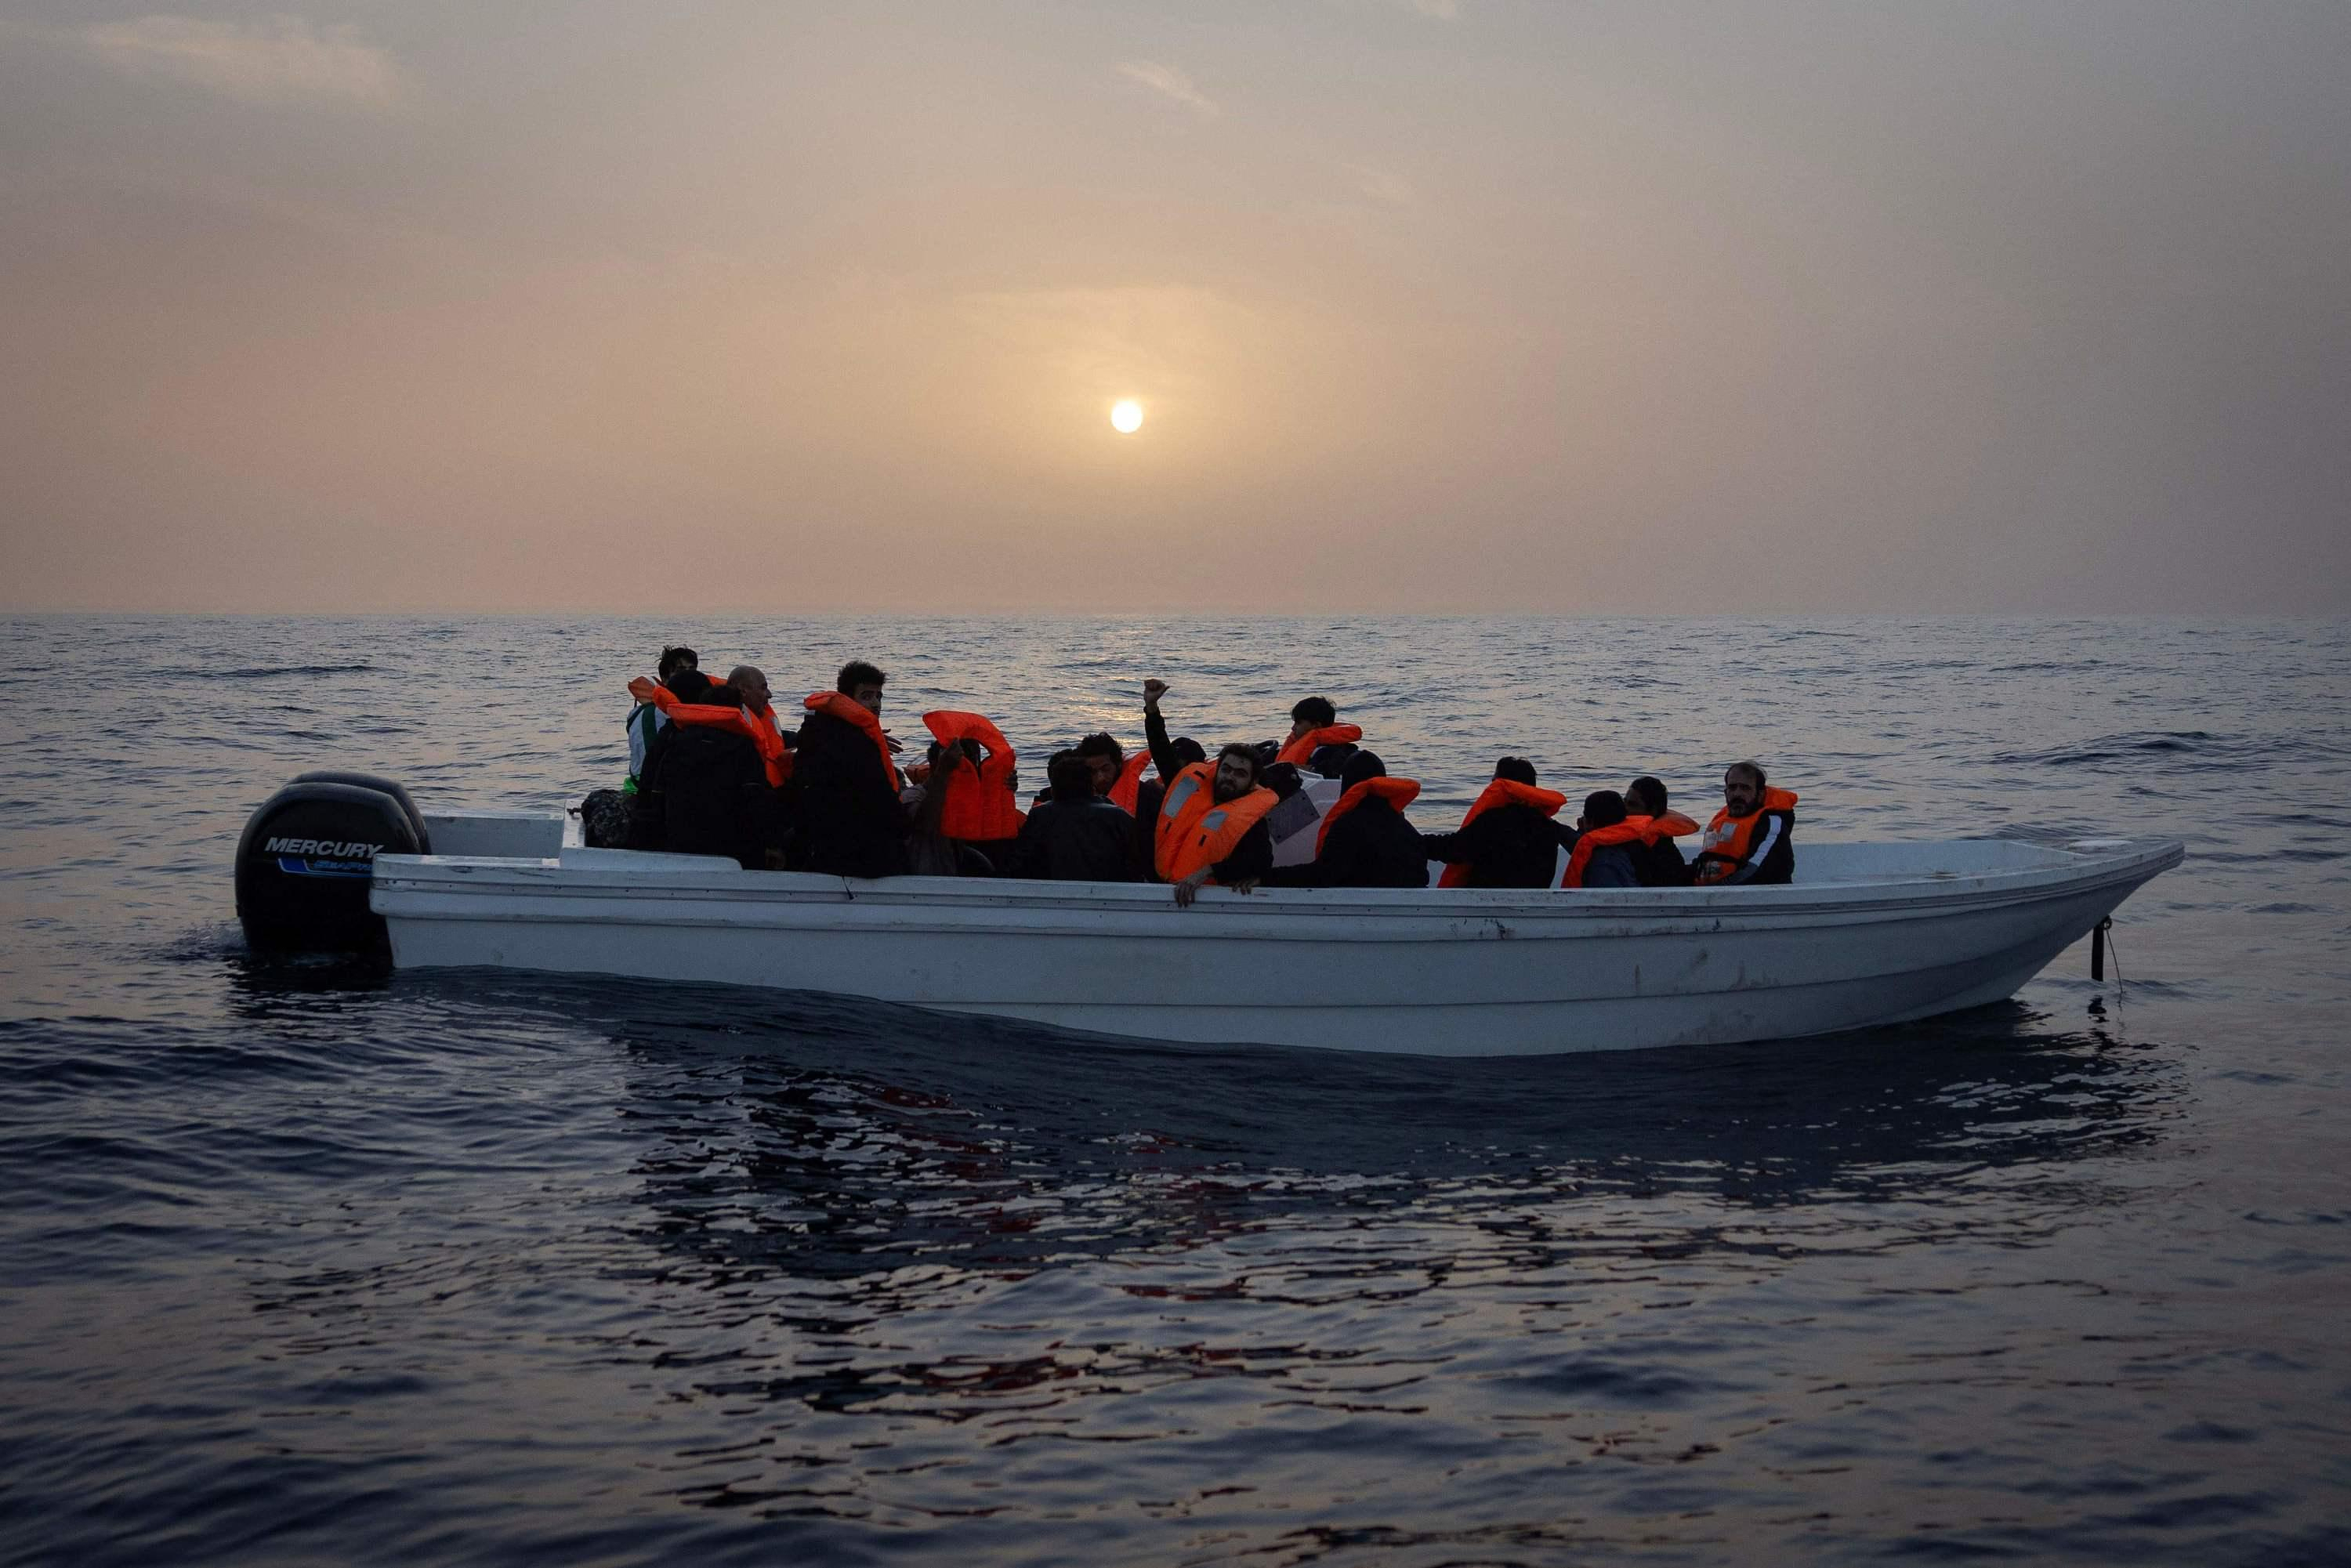 Immigration: projects to outsource asylum applications are progressing in Europe